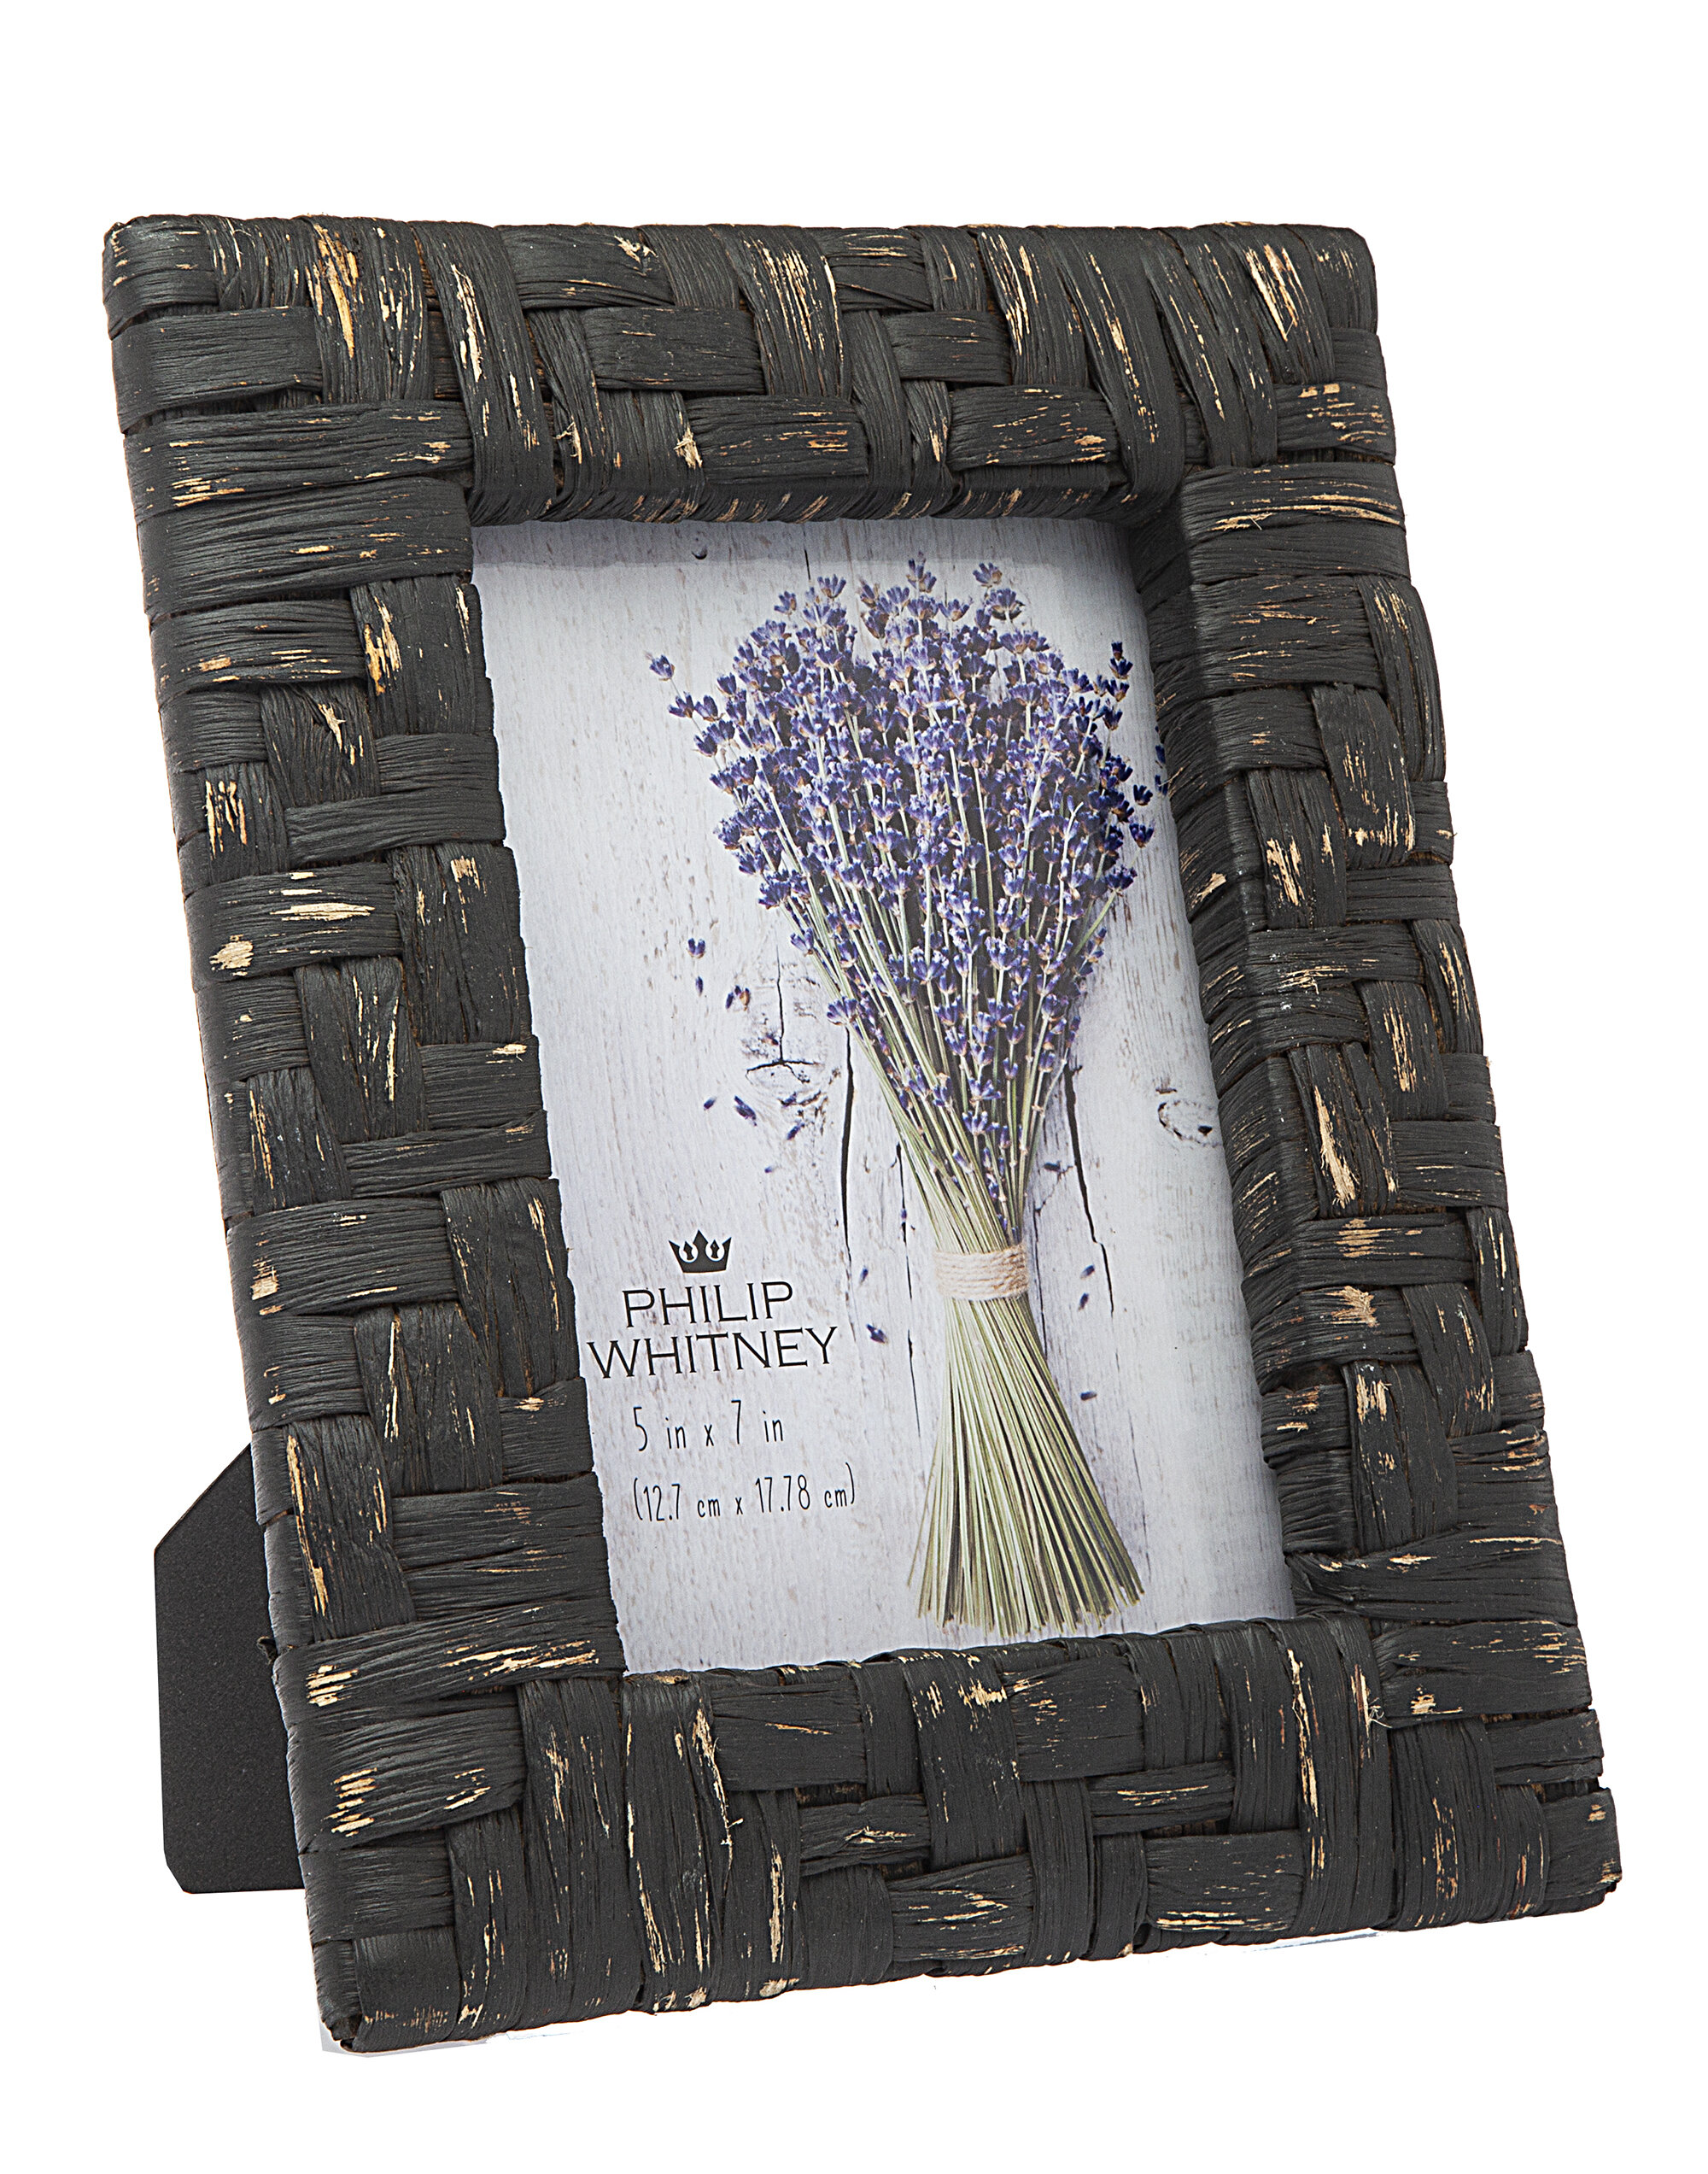 Black/brown Distressed Timber/Wicker Effect 4x6 Photo Picture Frame glass front